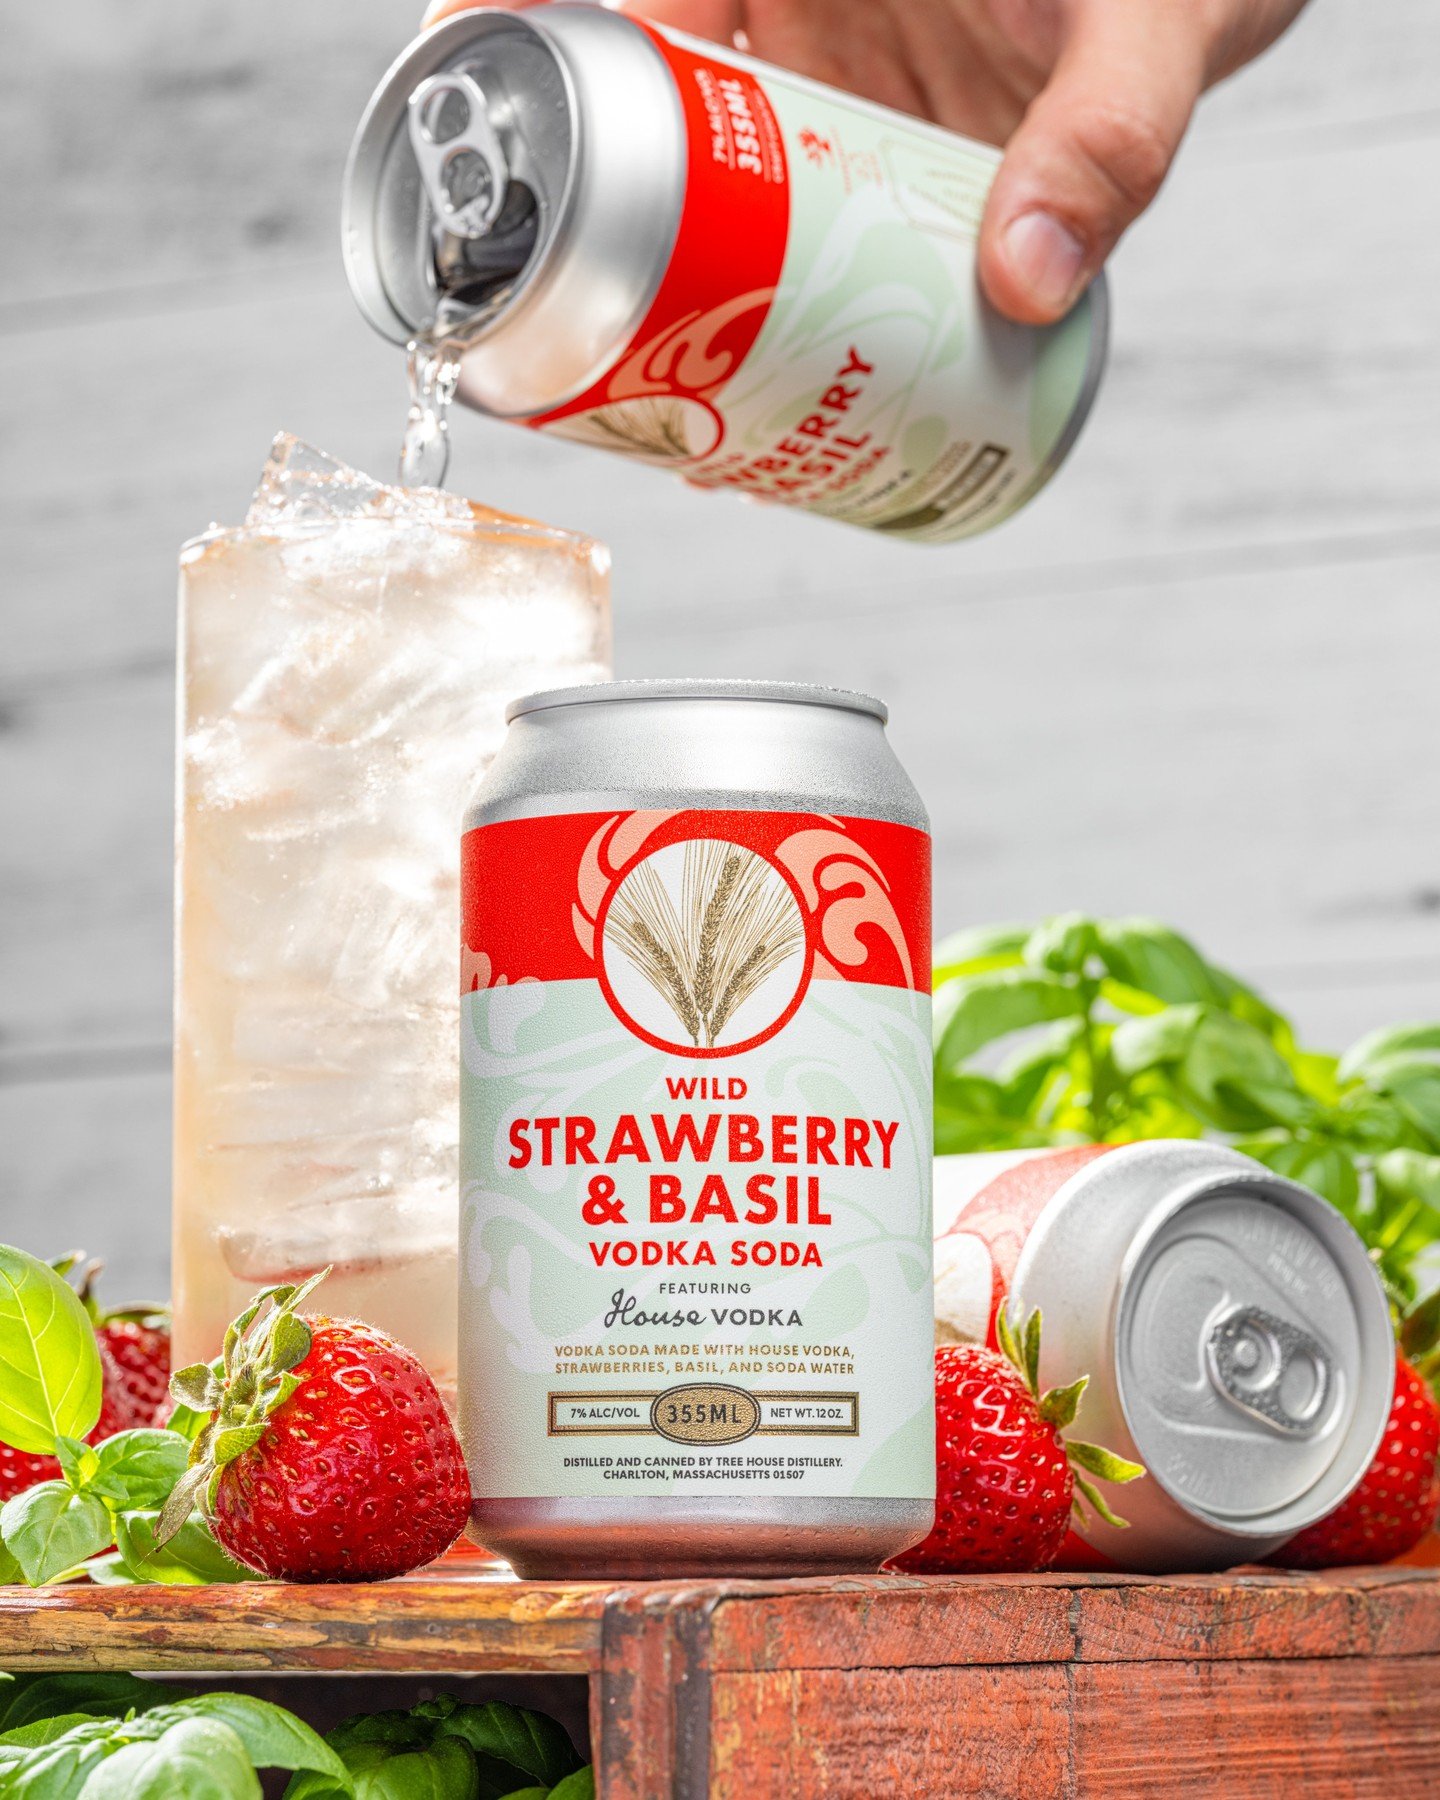 Alllllright, alright, alright.

It's Friday, the weekend looks mint, and we've got the goods rolling down our canning line into your loving embrace, starting with a fresh round of Strawberry &amp; Basil Vodka Soda.

#productphotography #photography #